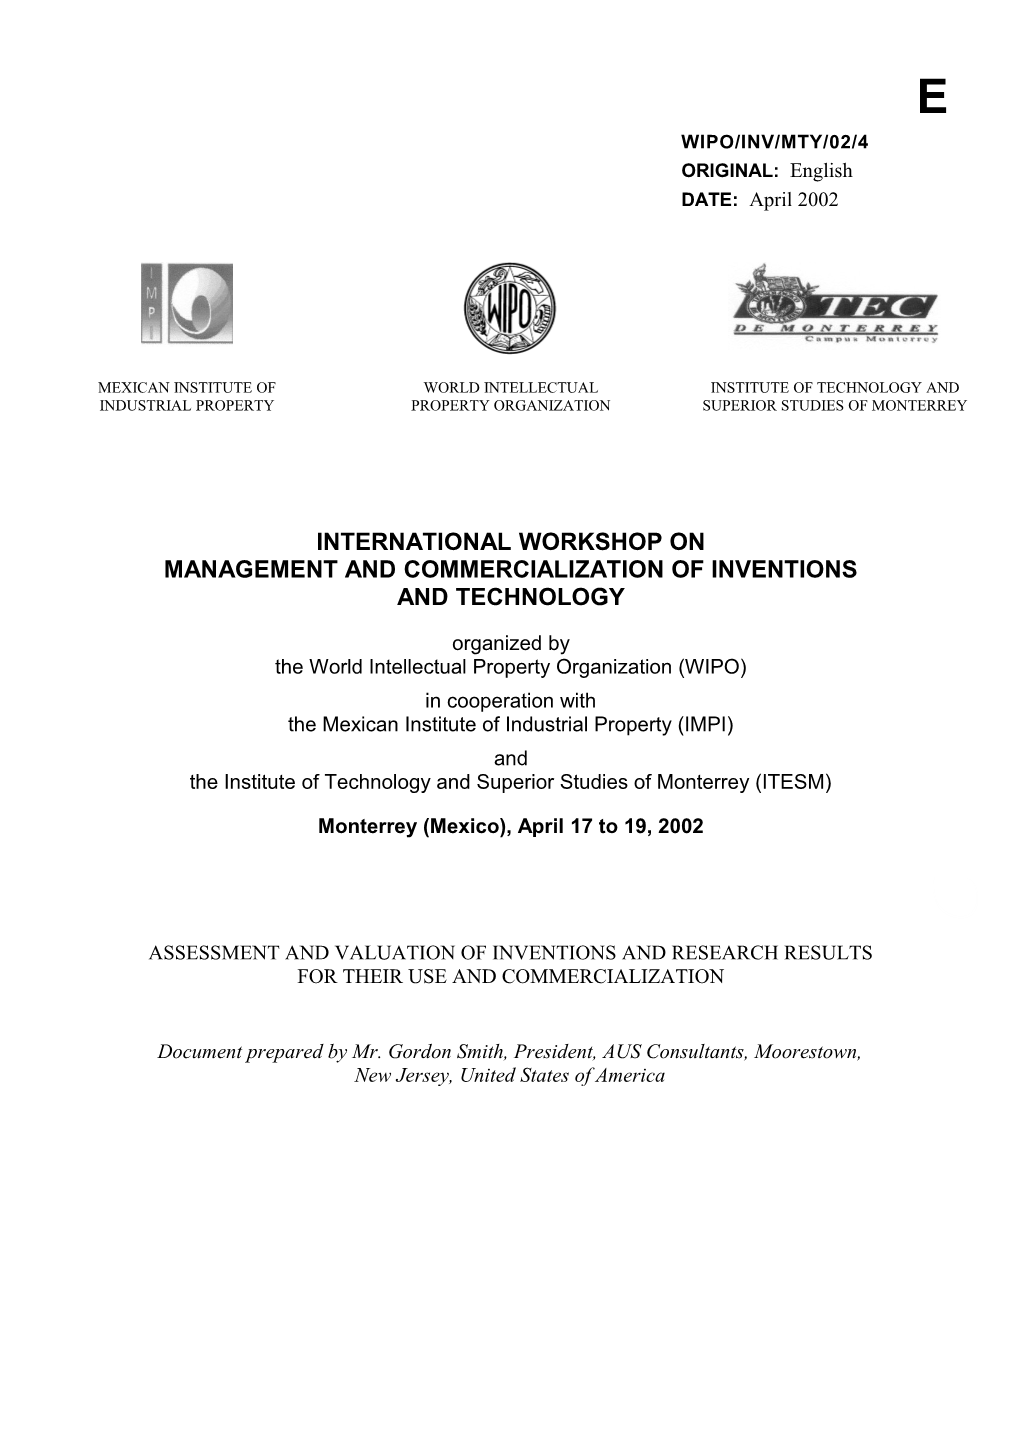 WIPO/INV/MTY/02/4: Assessment and Valuation of Inventions and Research Results for Their